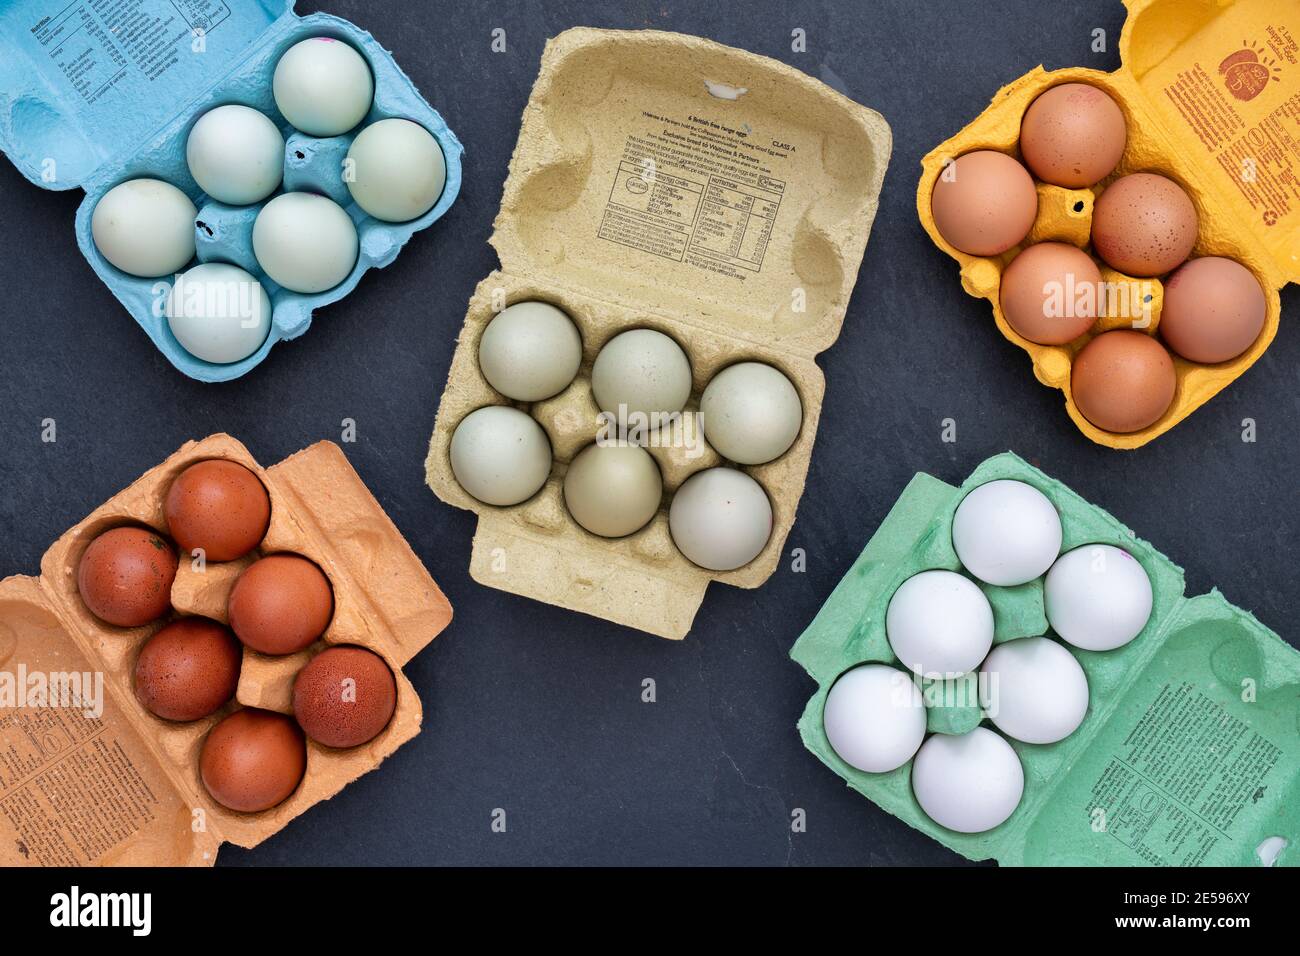 Different types of free range eggs in boxes on a slate background Stock Photo